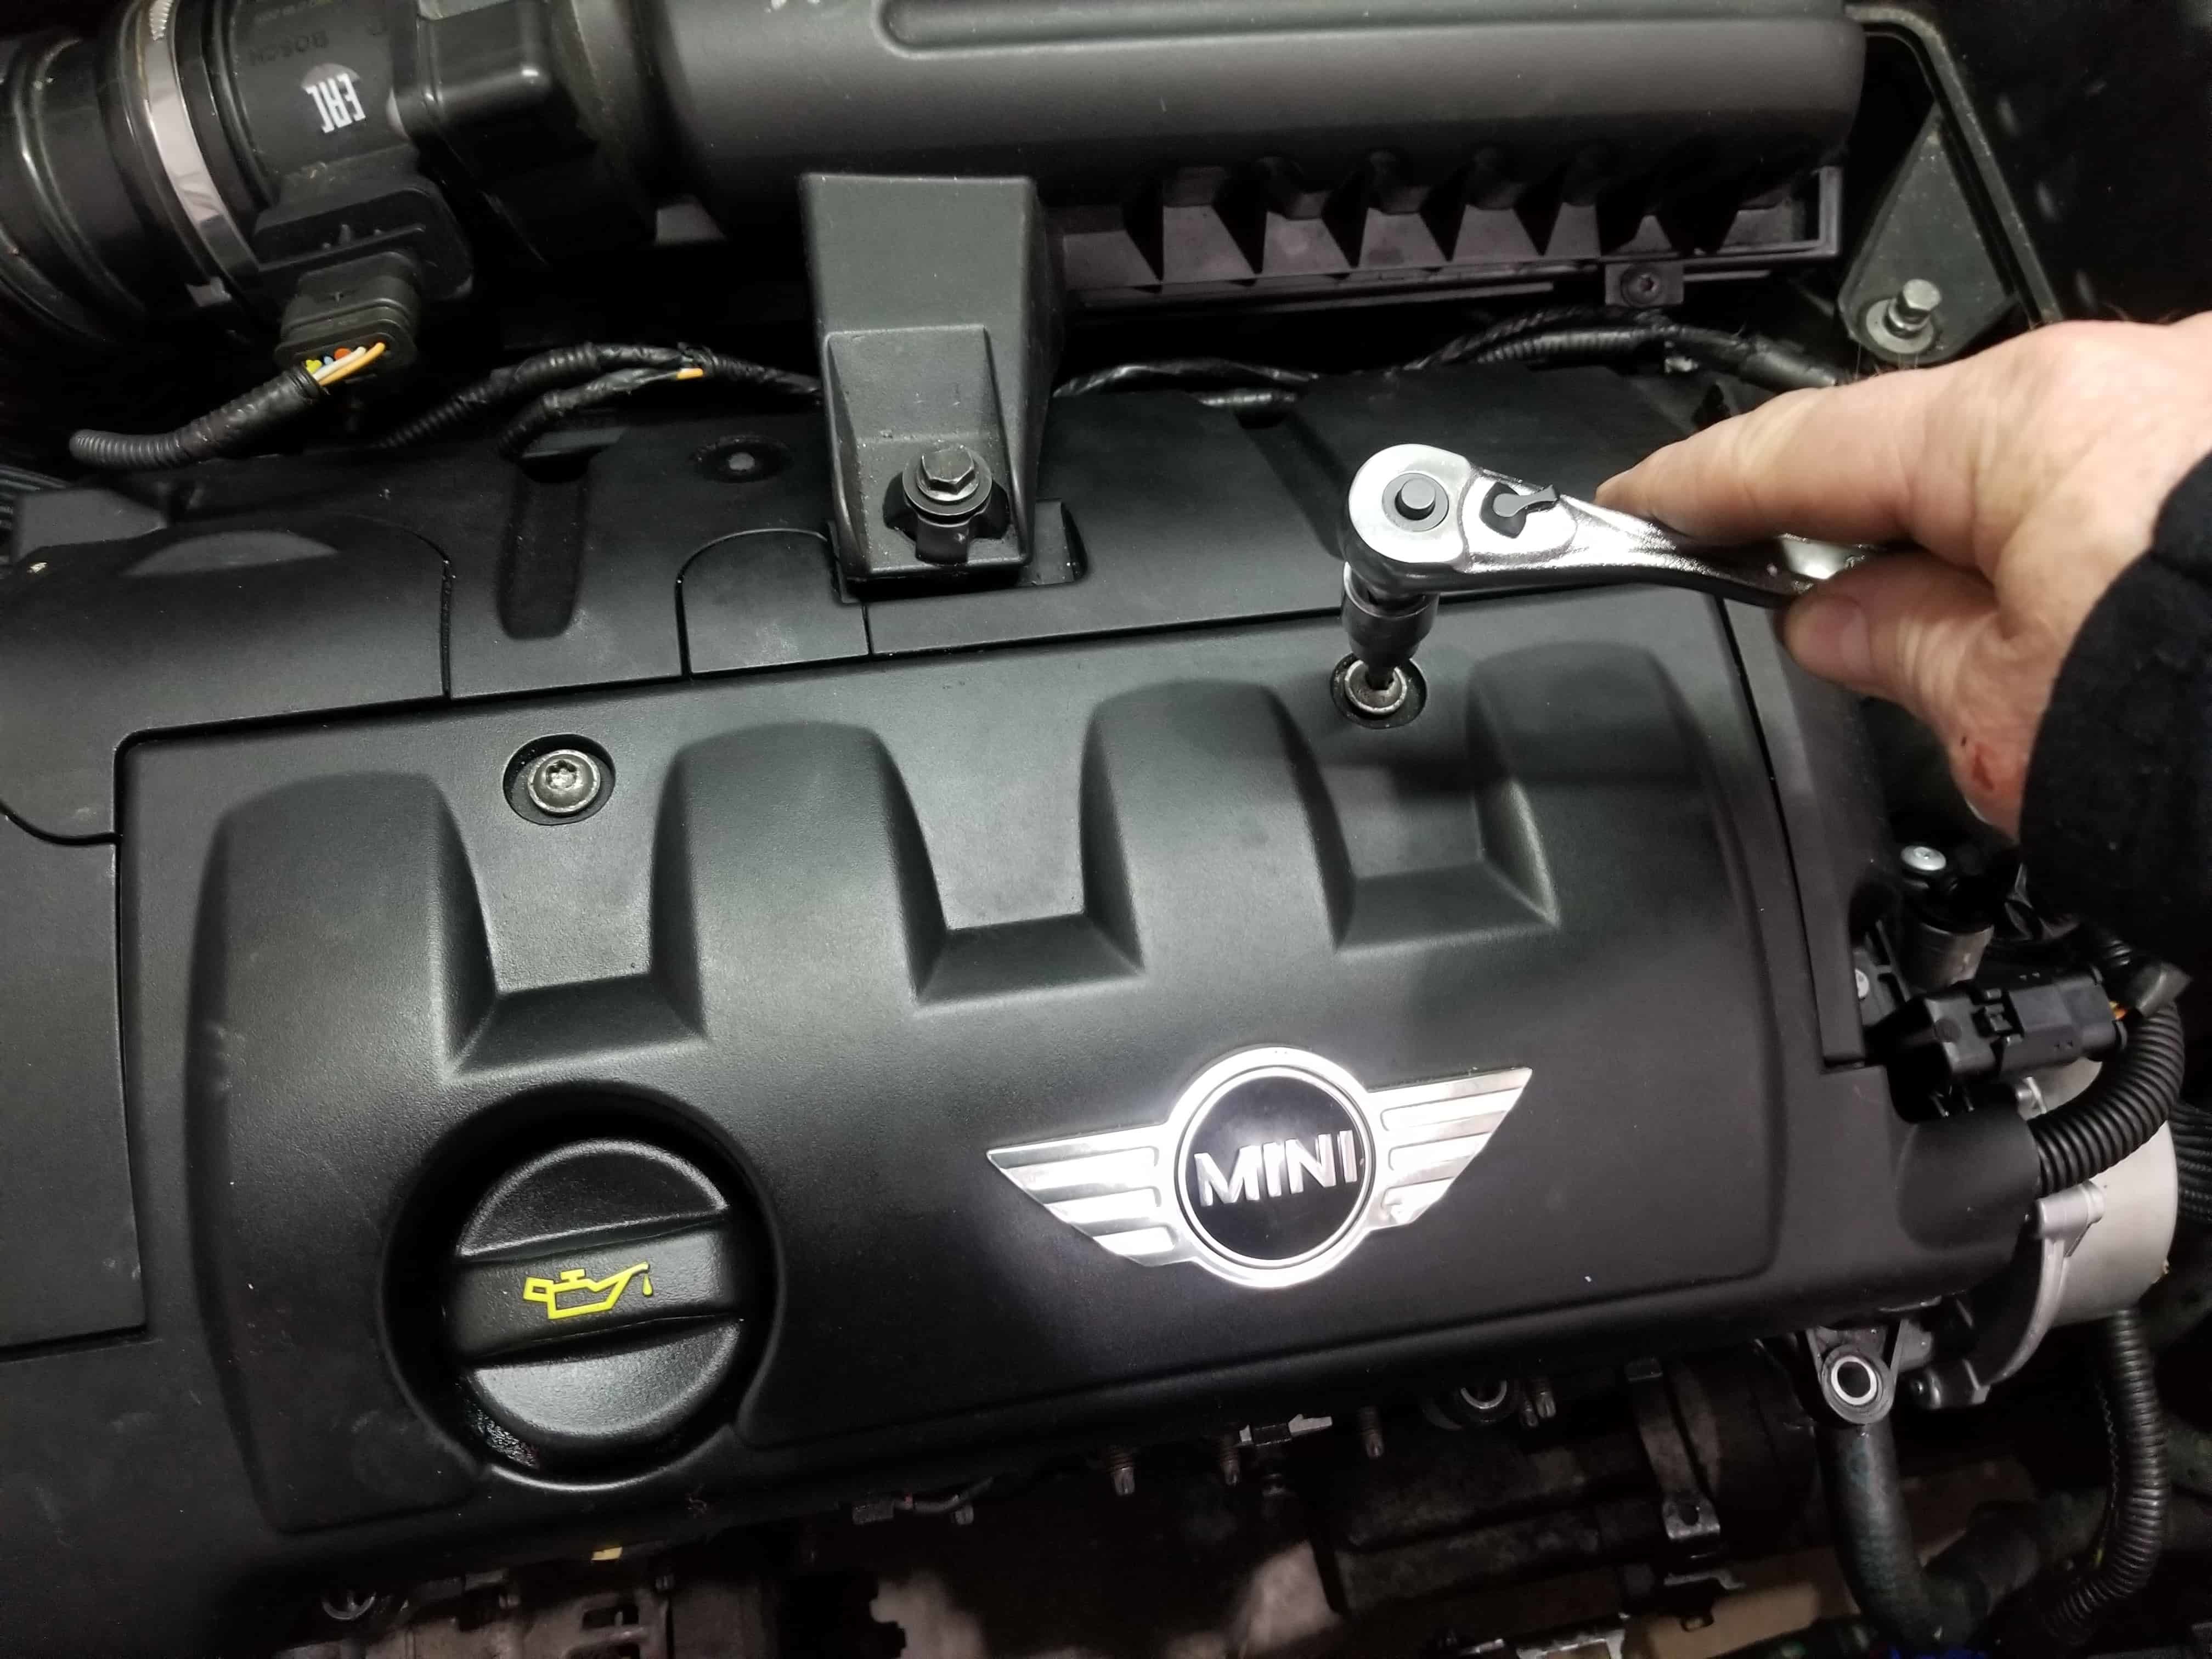 MINI R56 Tune Up - Remove the two engine cover mounting bolts.